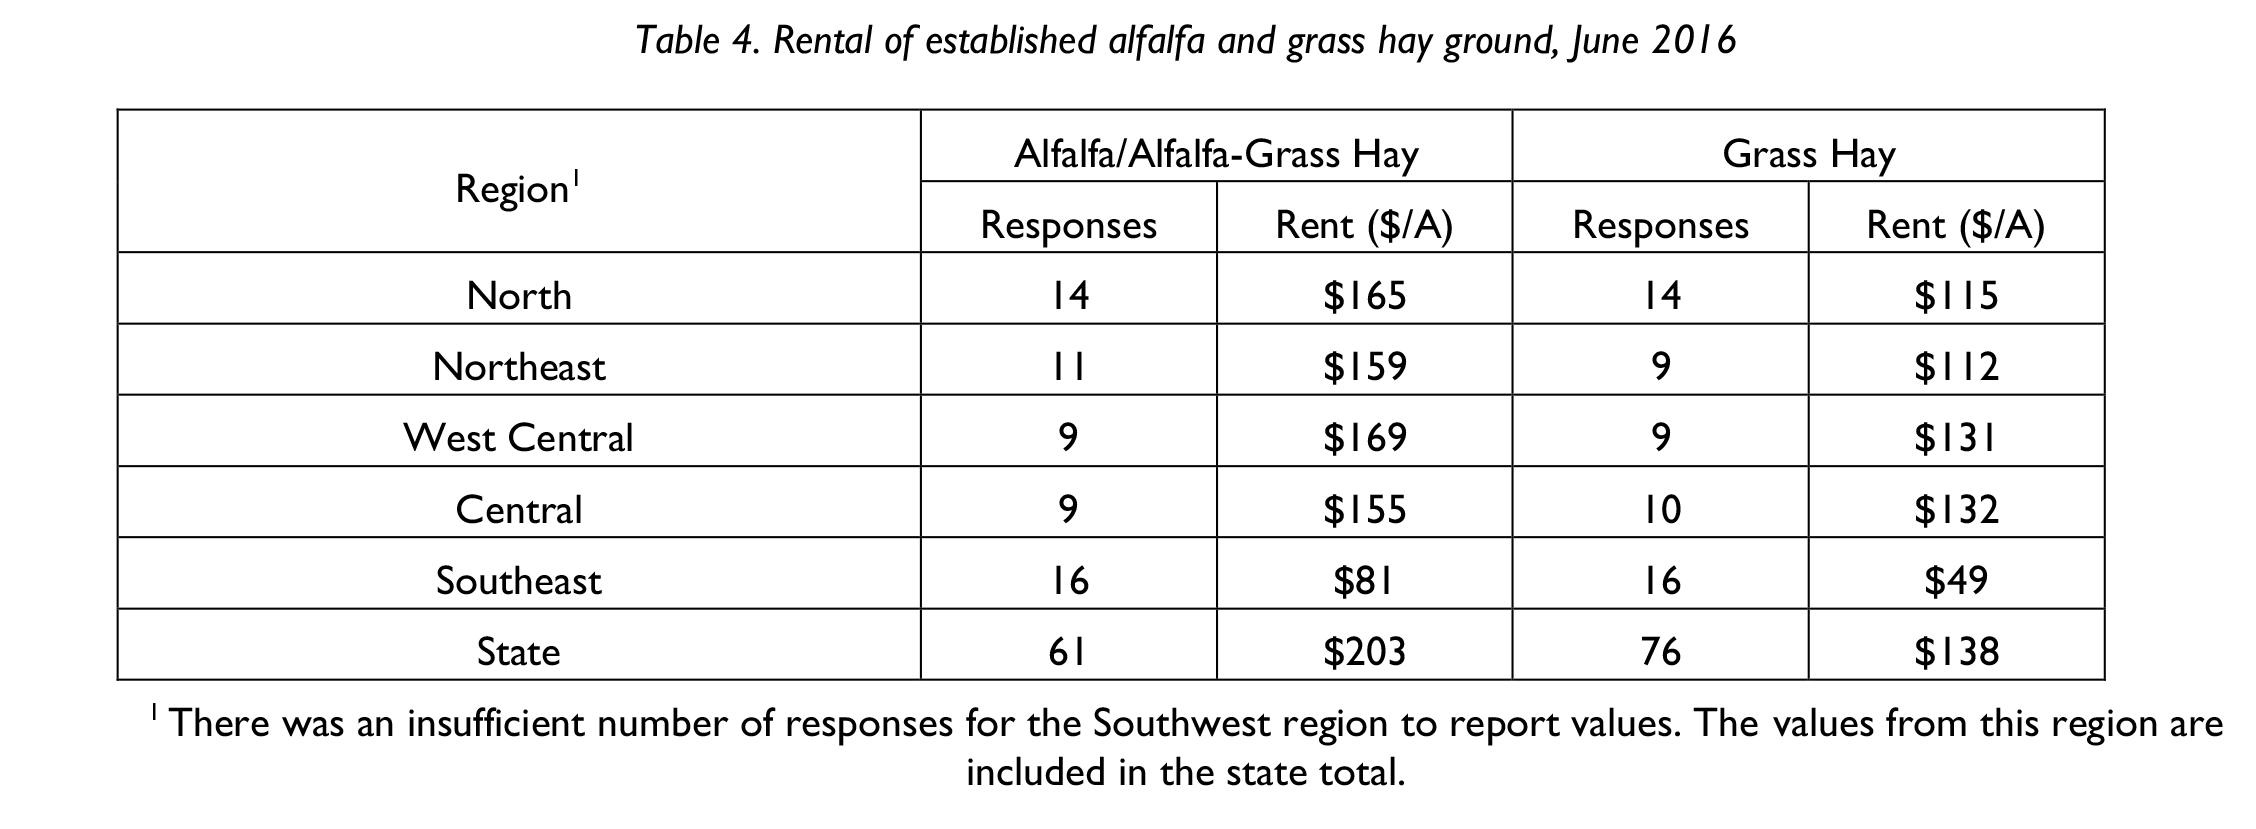 Table 4. Rental of established alfalfa and grass hay ground, June 2016